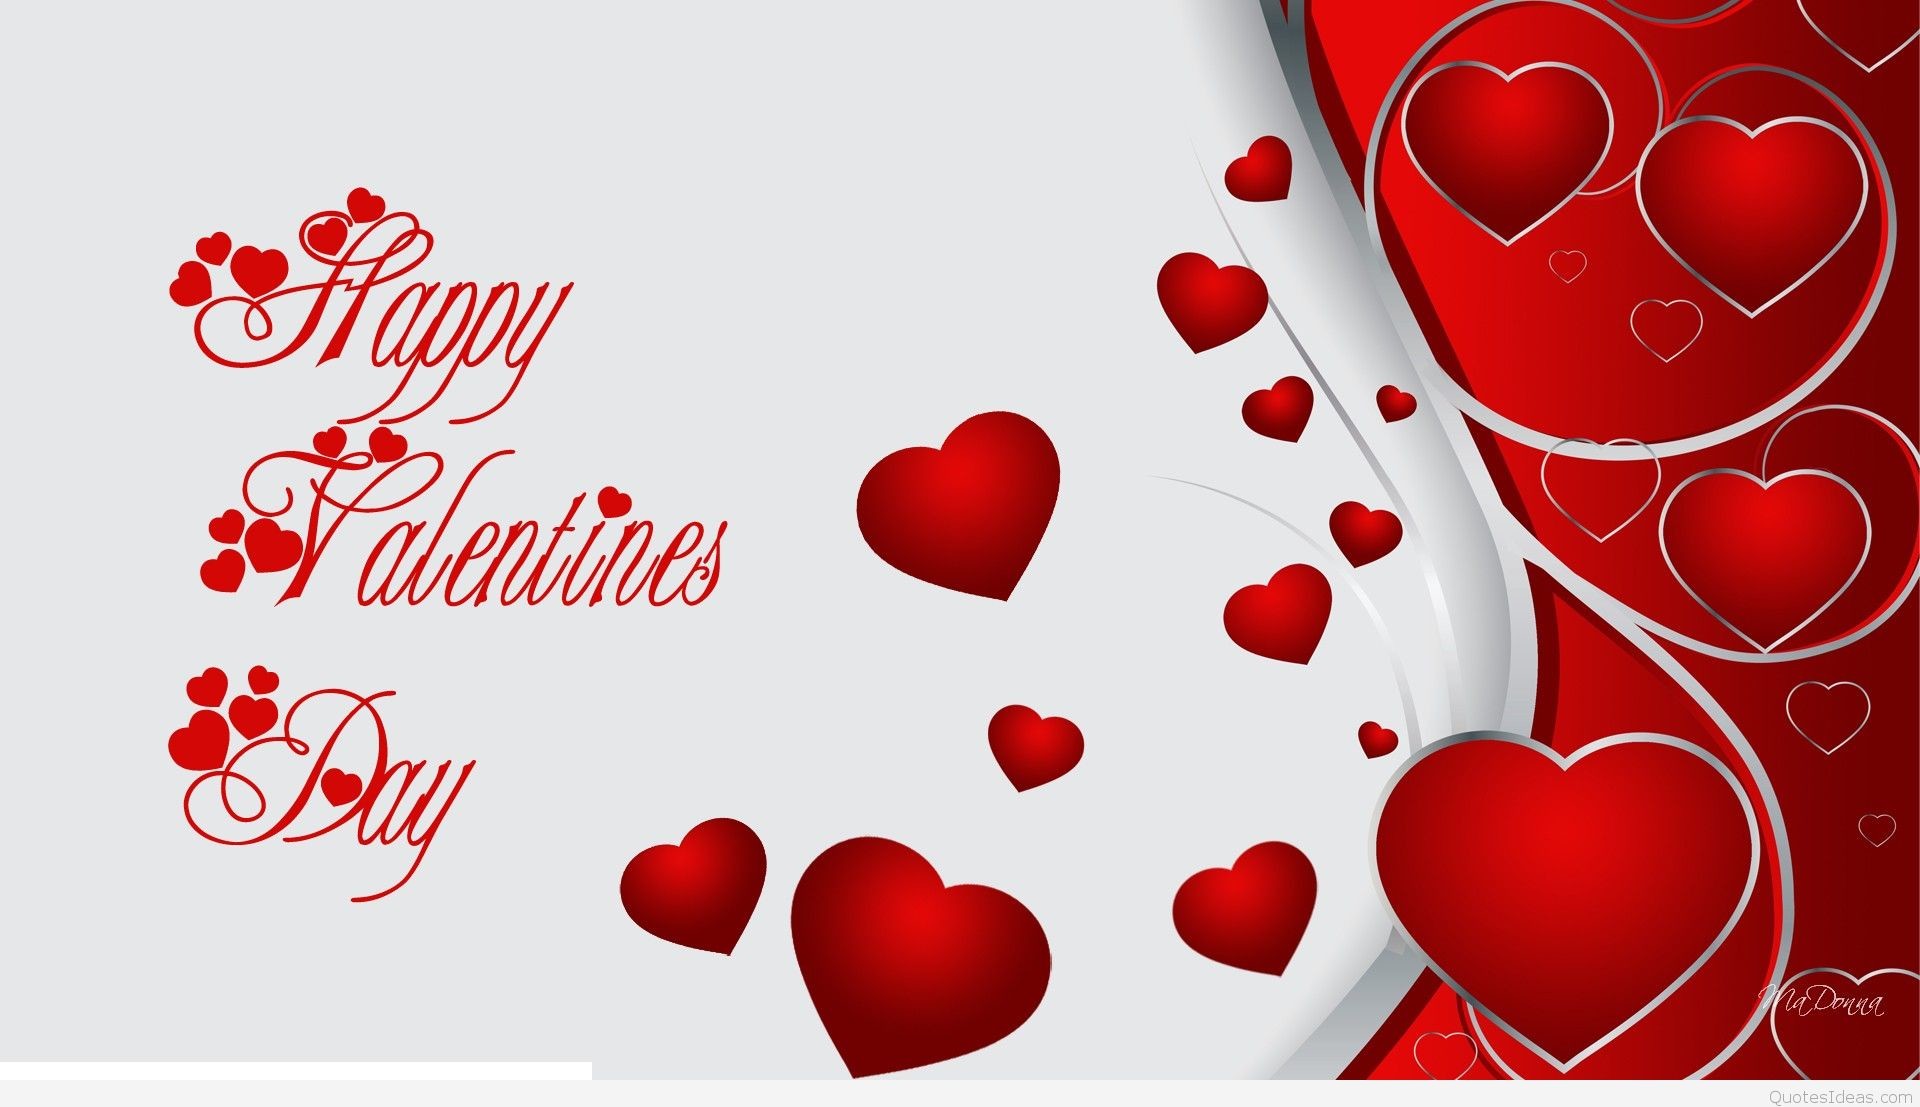 Happy valentine day HD Wallpapers for pc2.